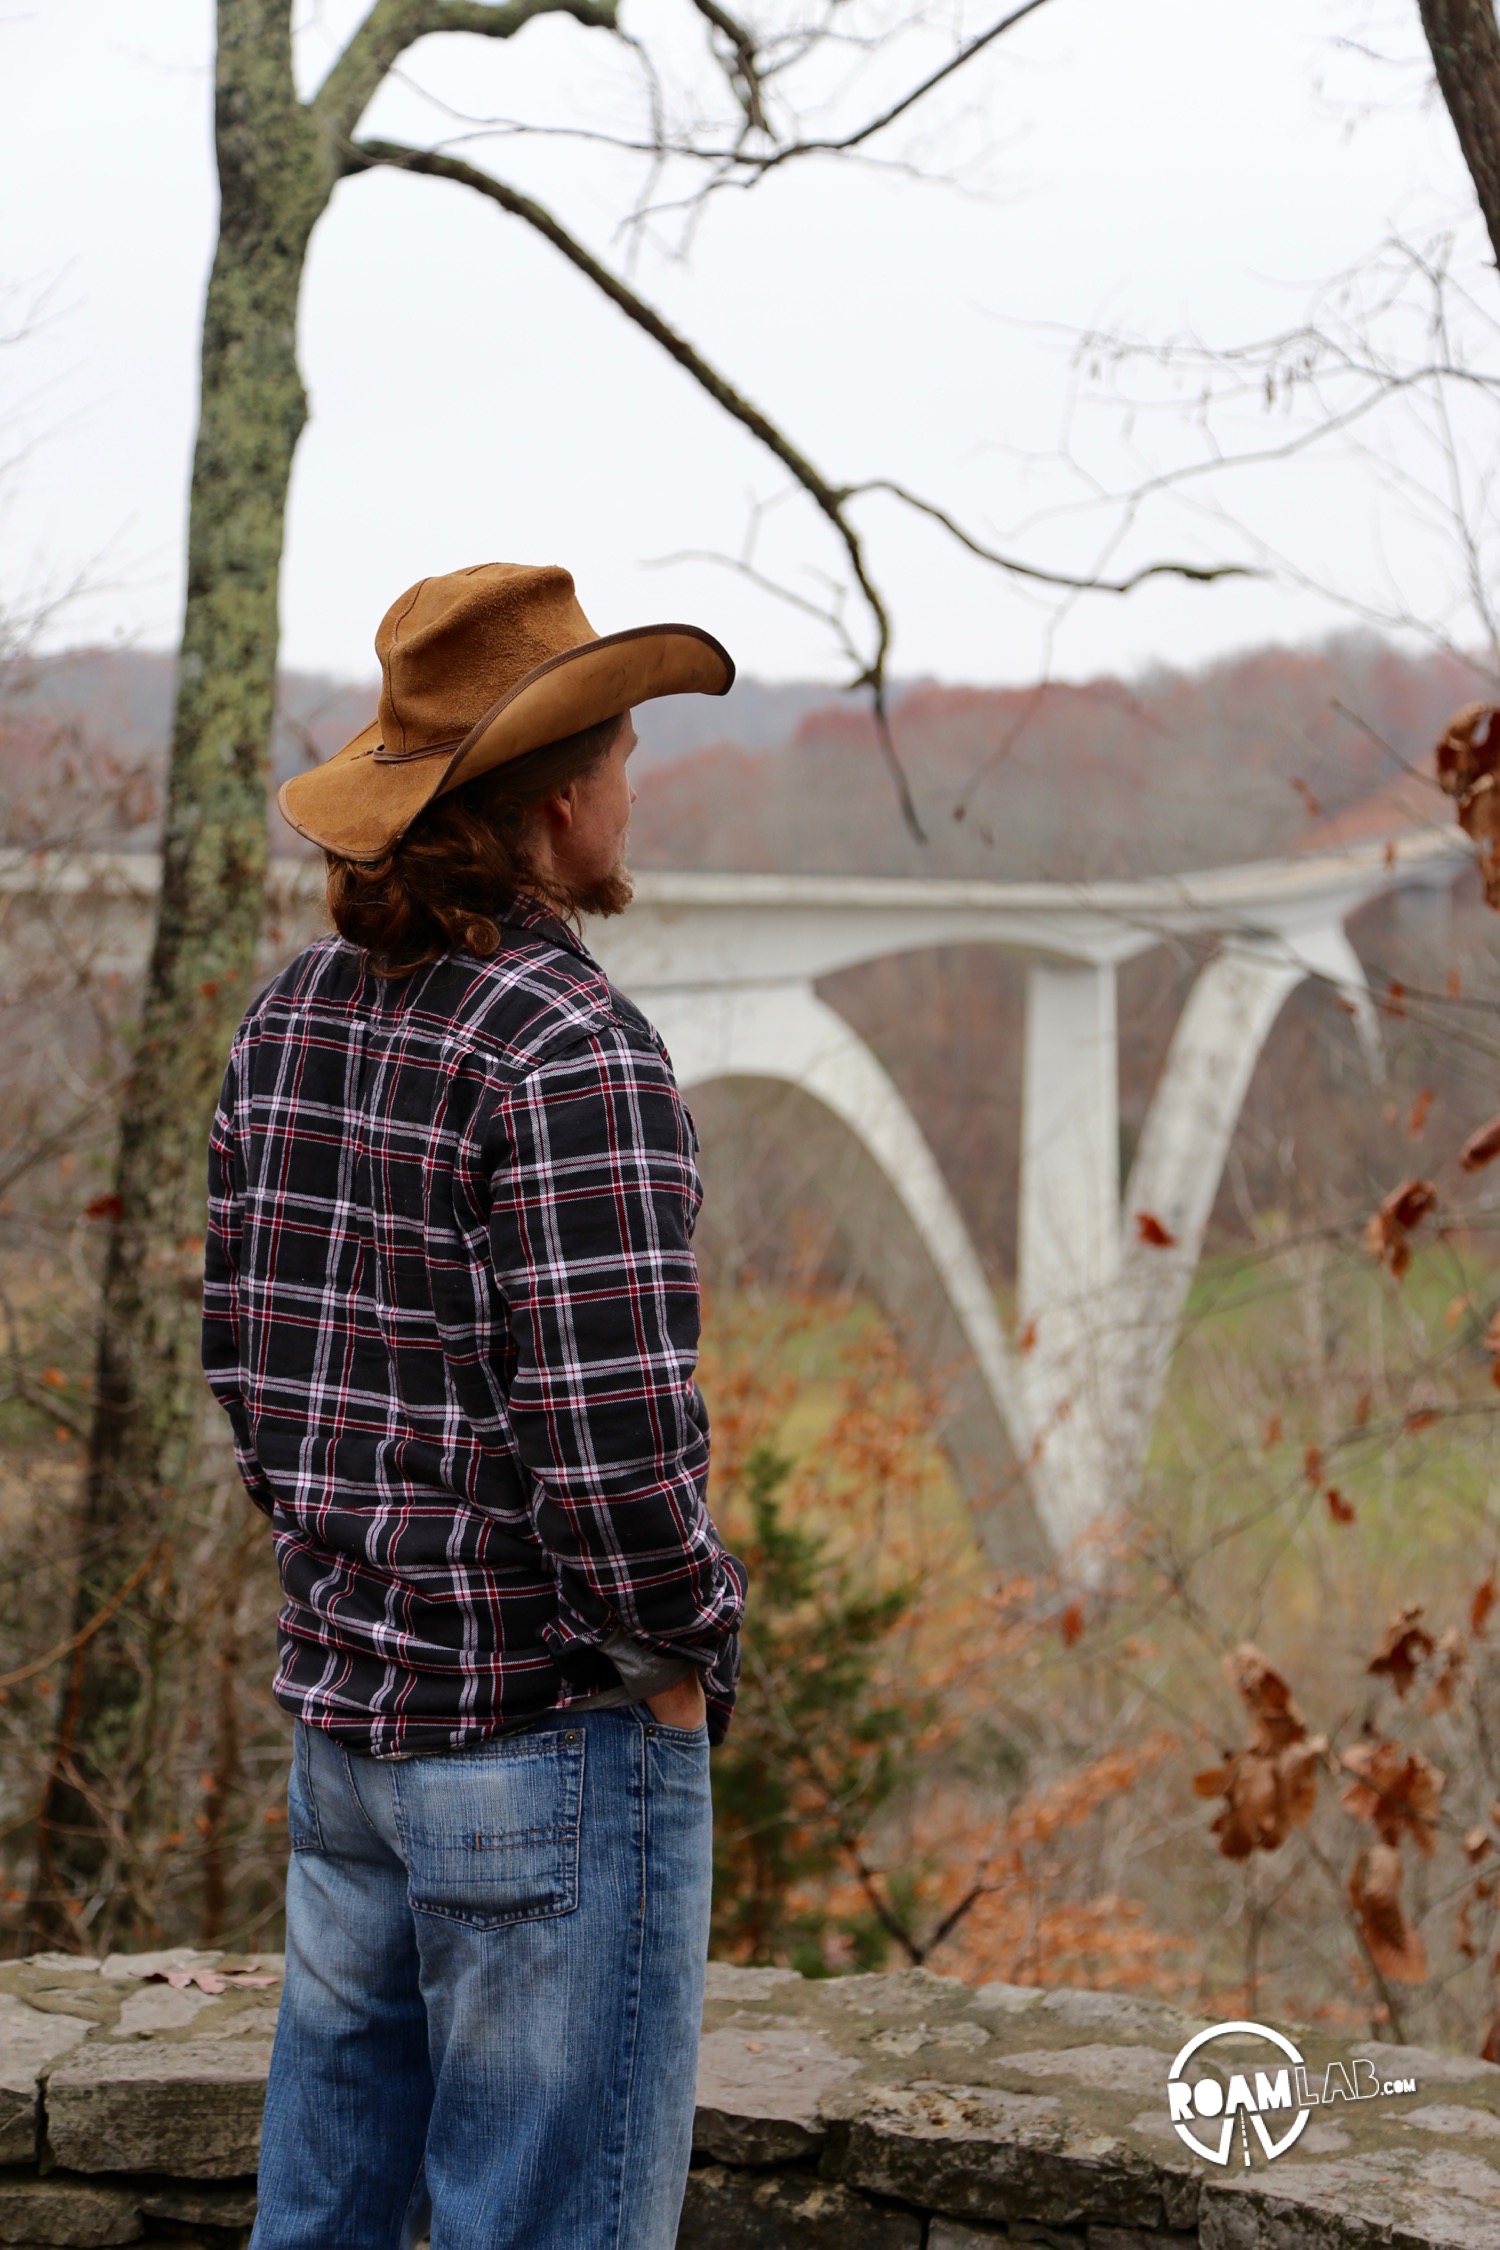 Overlooking the Double Arch Bridge along the Natchez Trace Parkway.